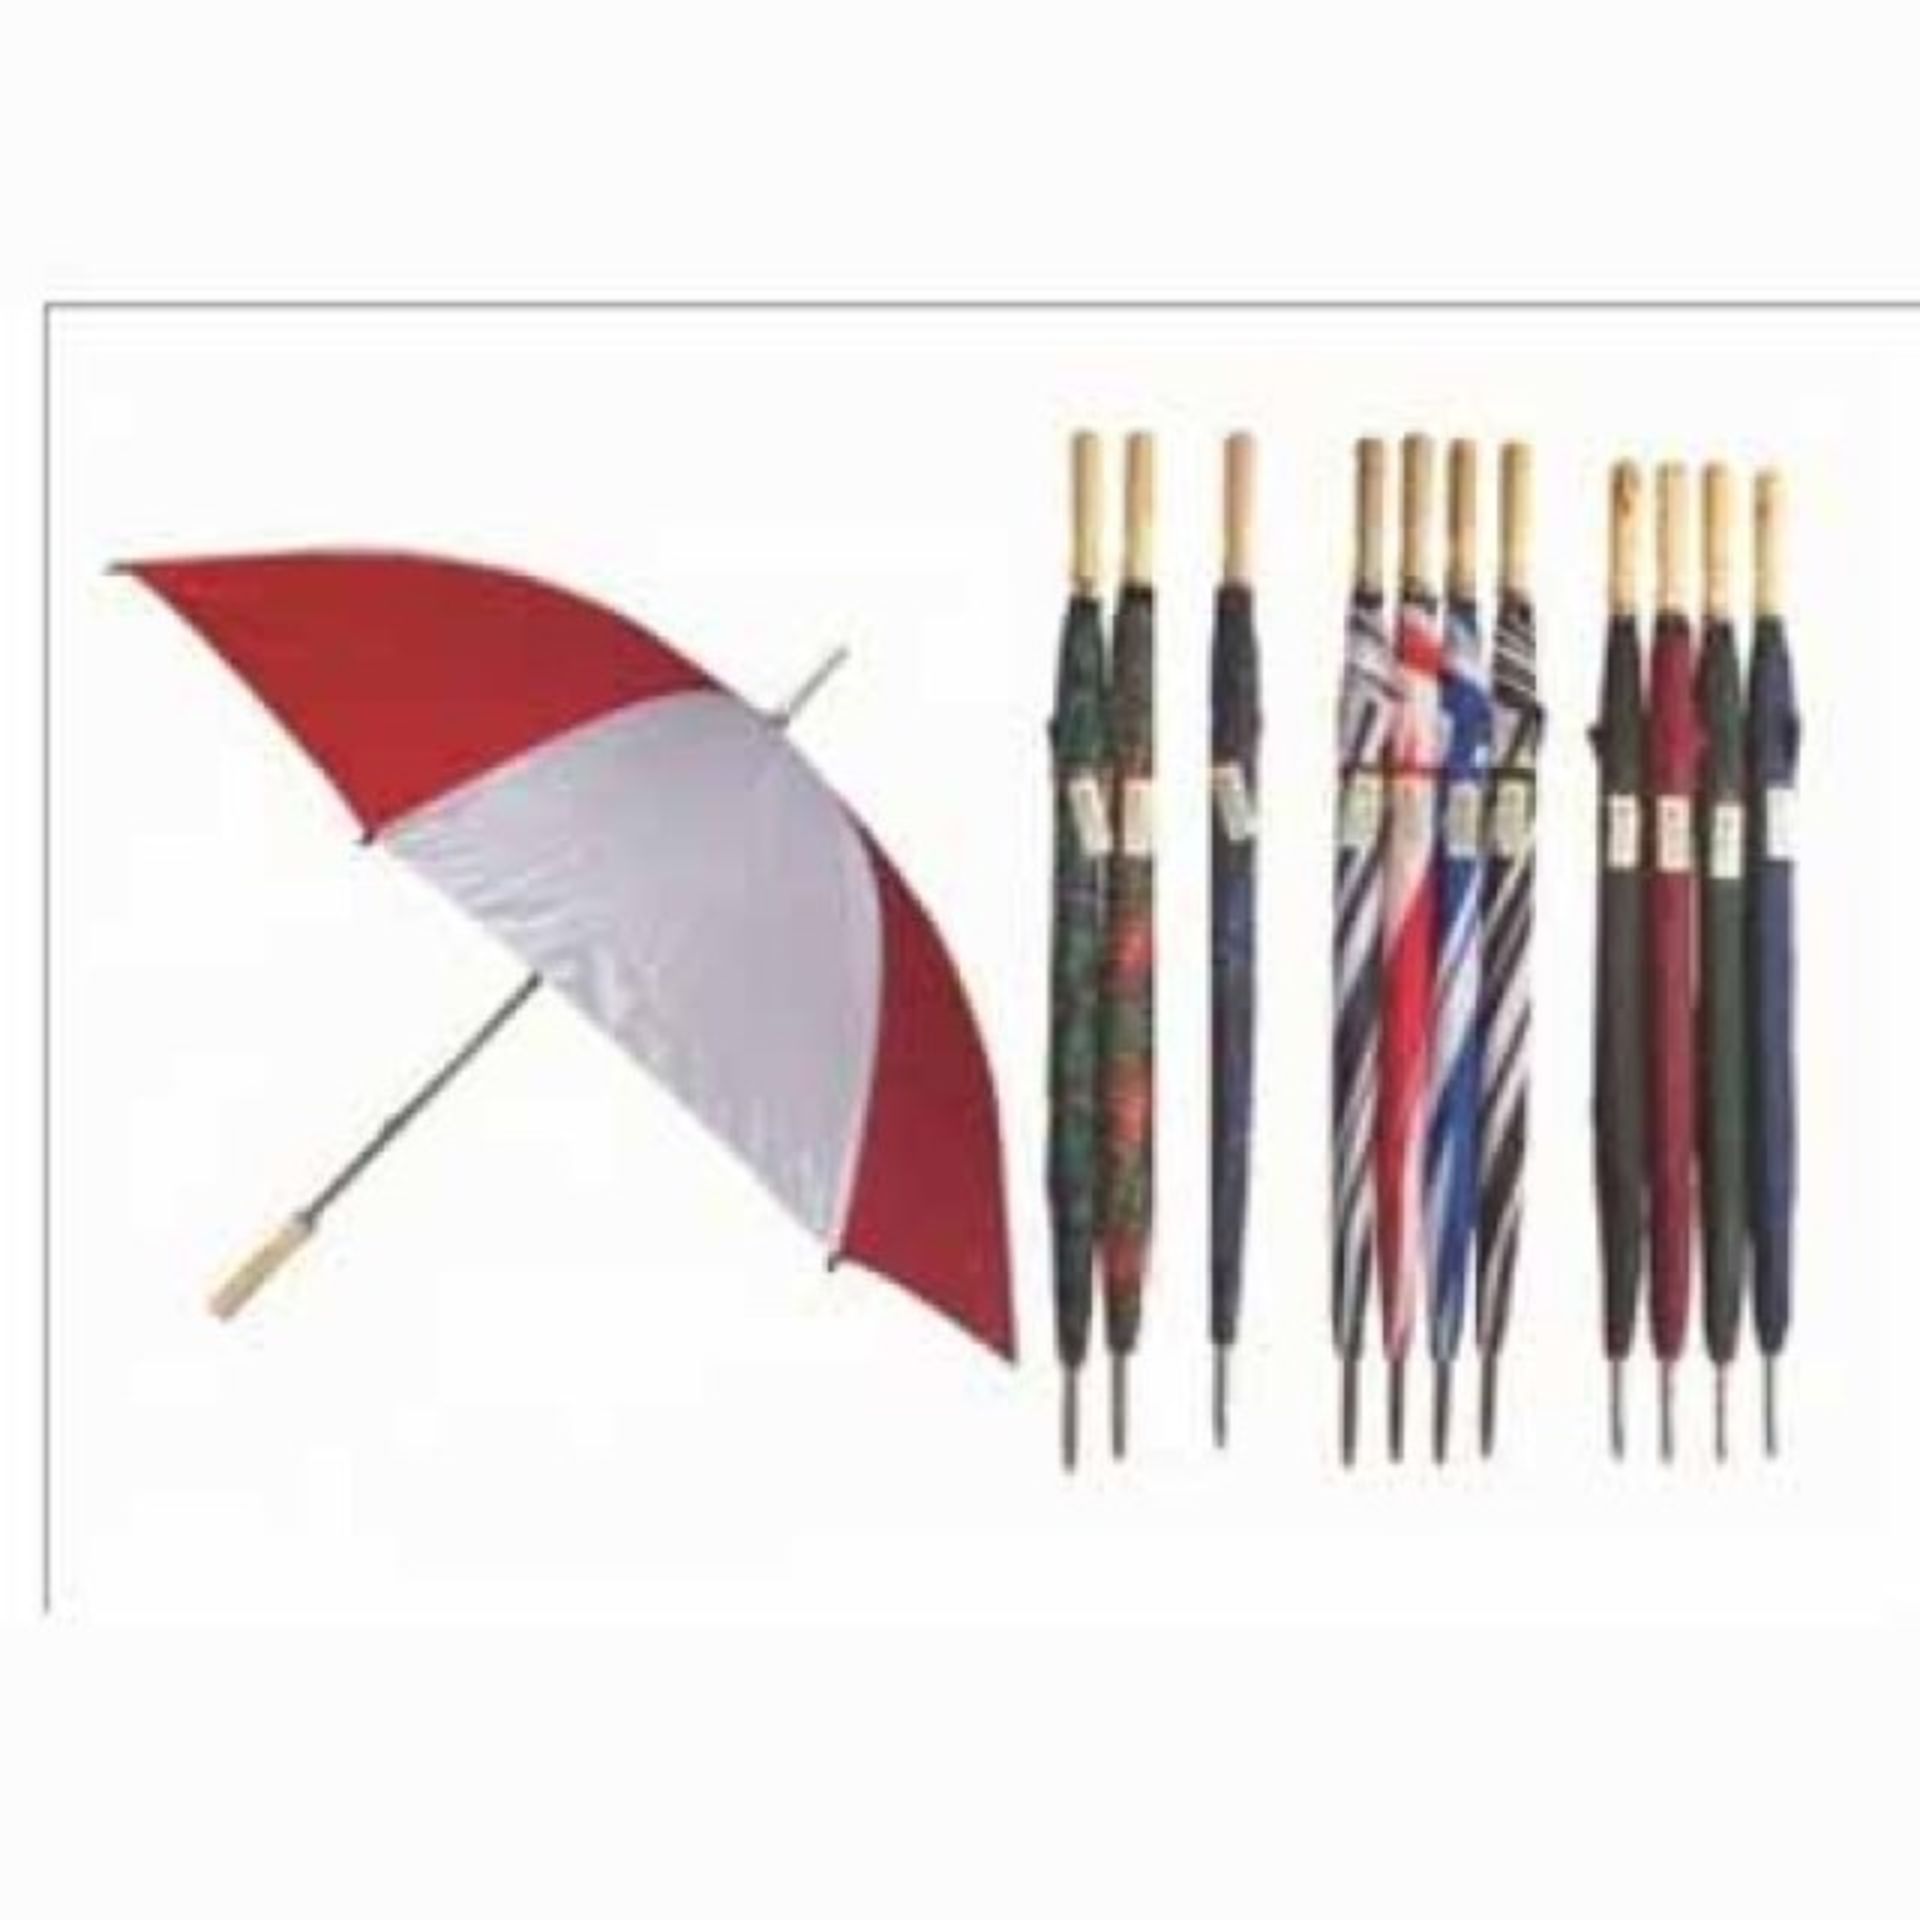 V Brand New Large Umbrella Various Colours and Patterns X 2 YOUR BID PRICE TO BE MULTIPLIED BY TWO